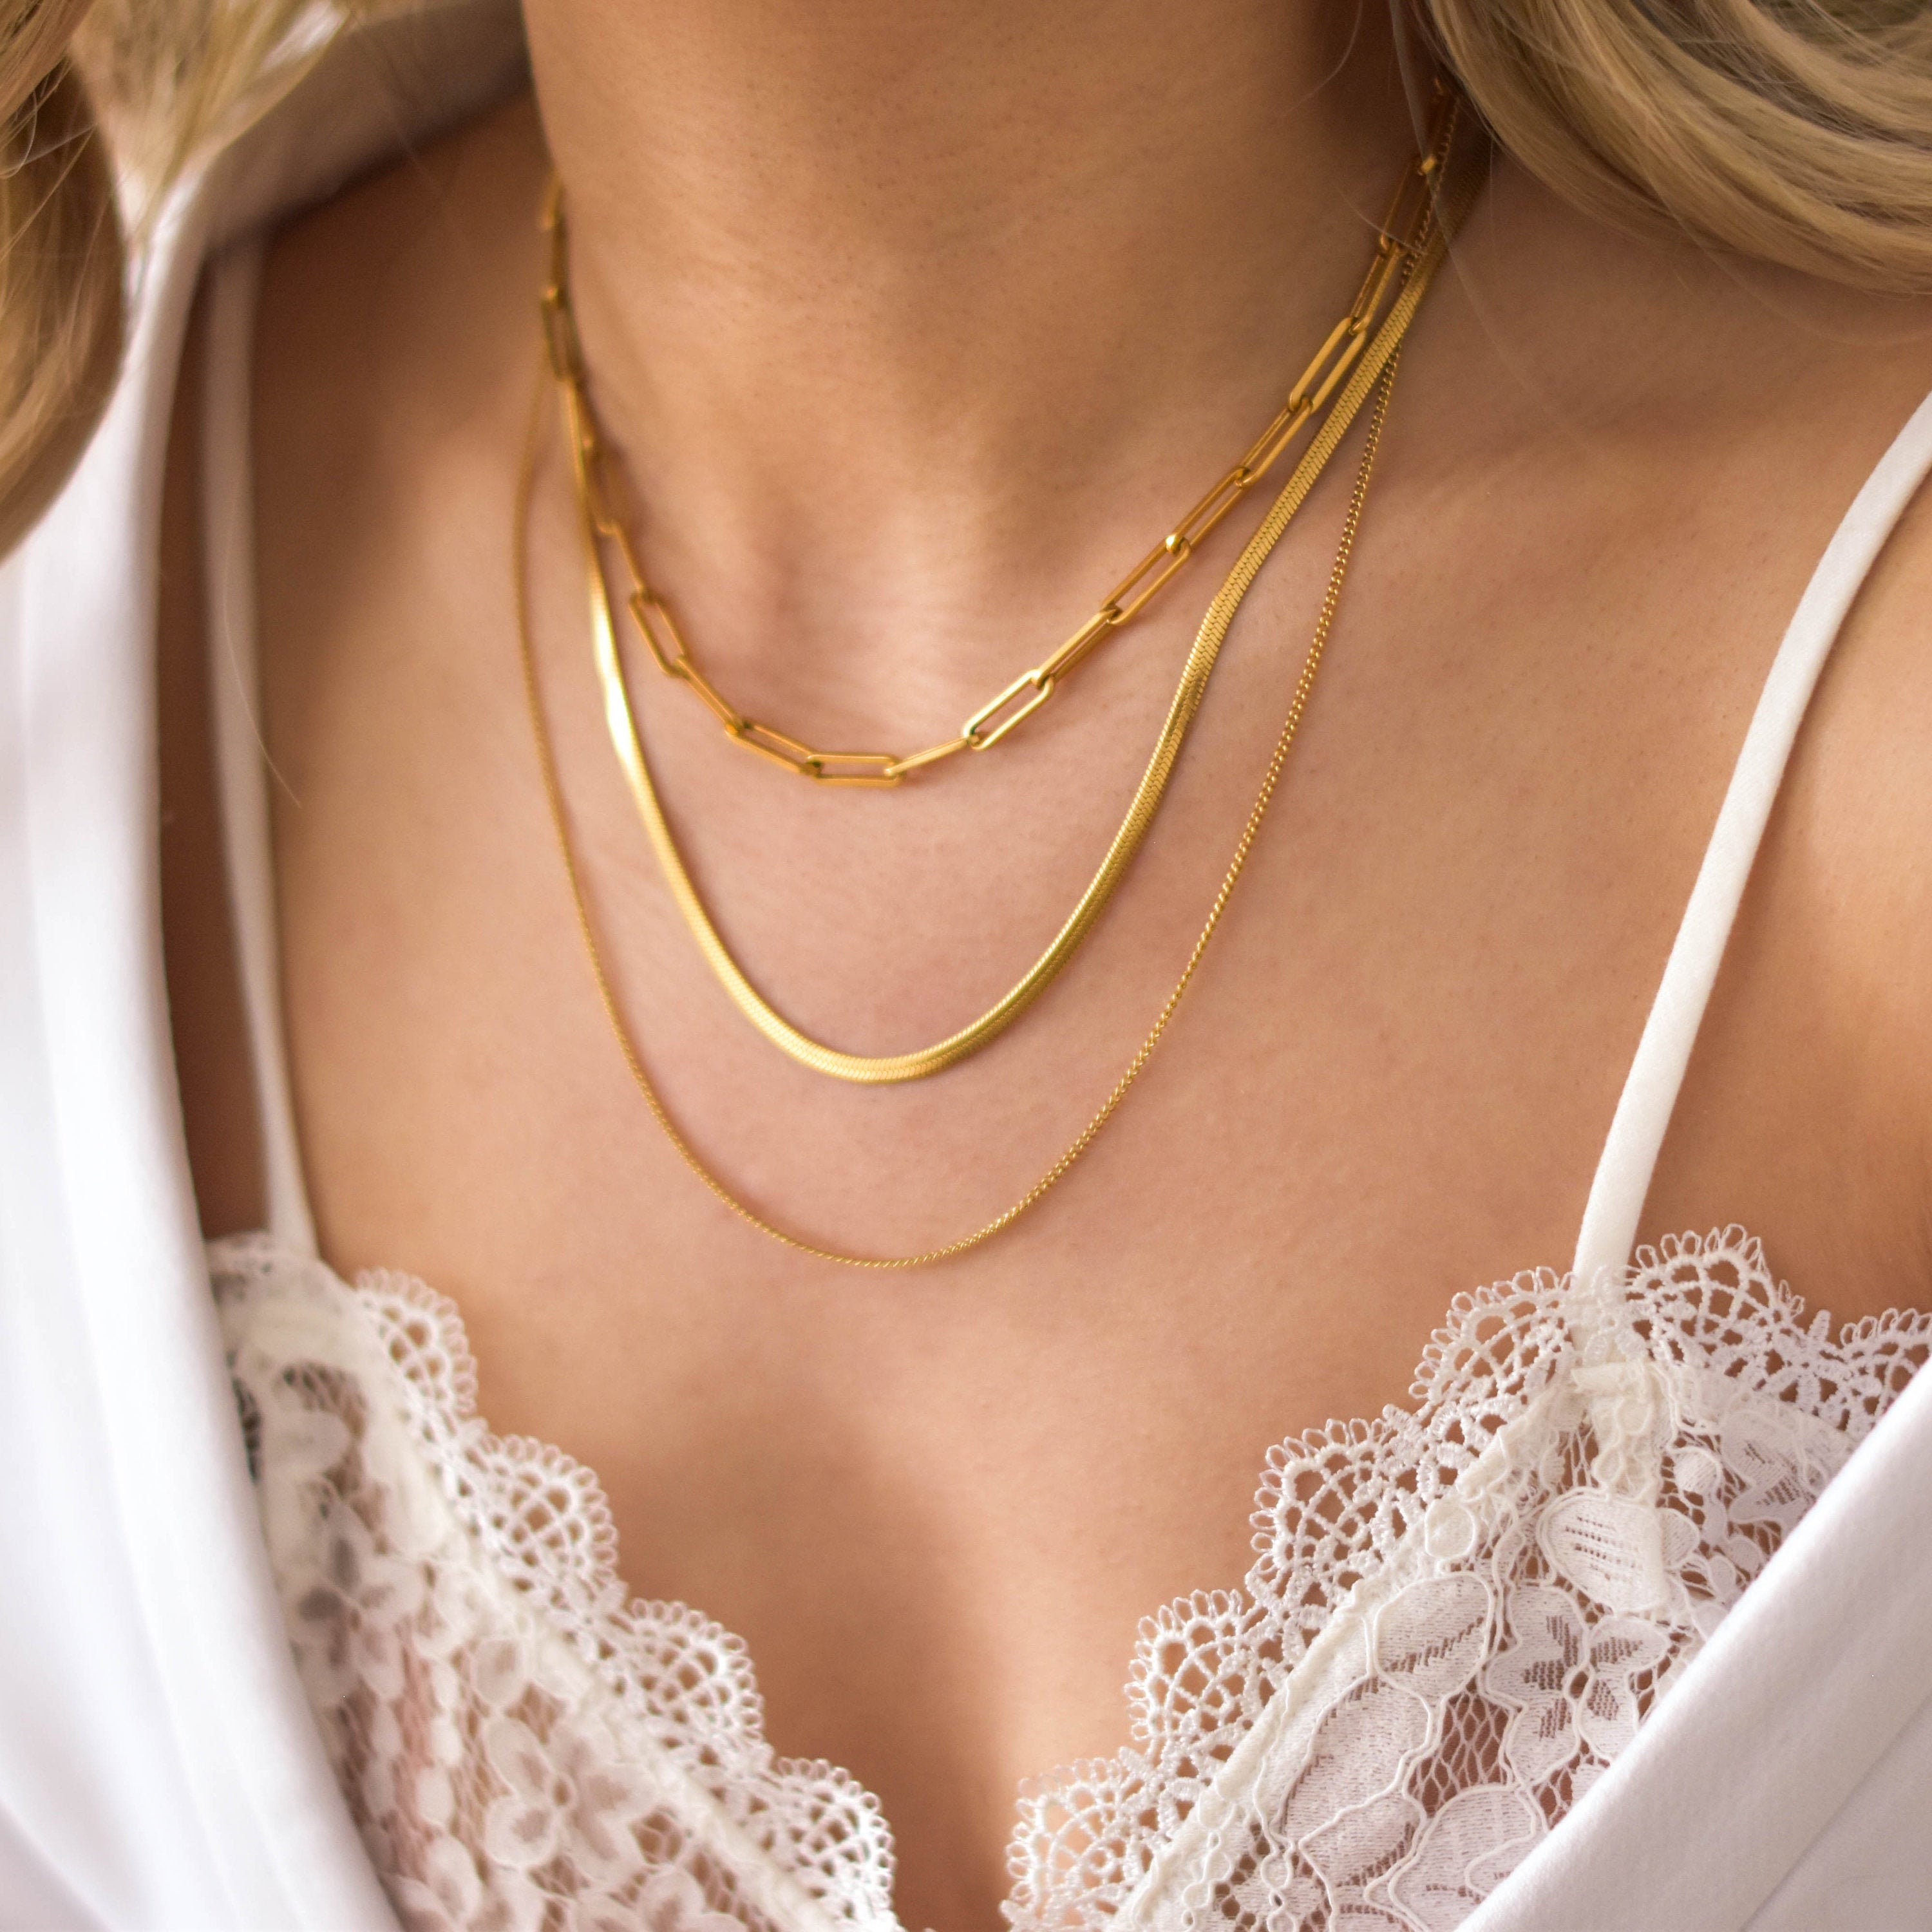 I'S ISAACSONG Layered Gold Chain Choker Necklaces Set, Cuban Link Chain,  Paper Clip Chain, Snake Chain, Rope Chain Dainty Gold Layering Necklaces  for